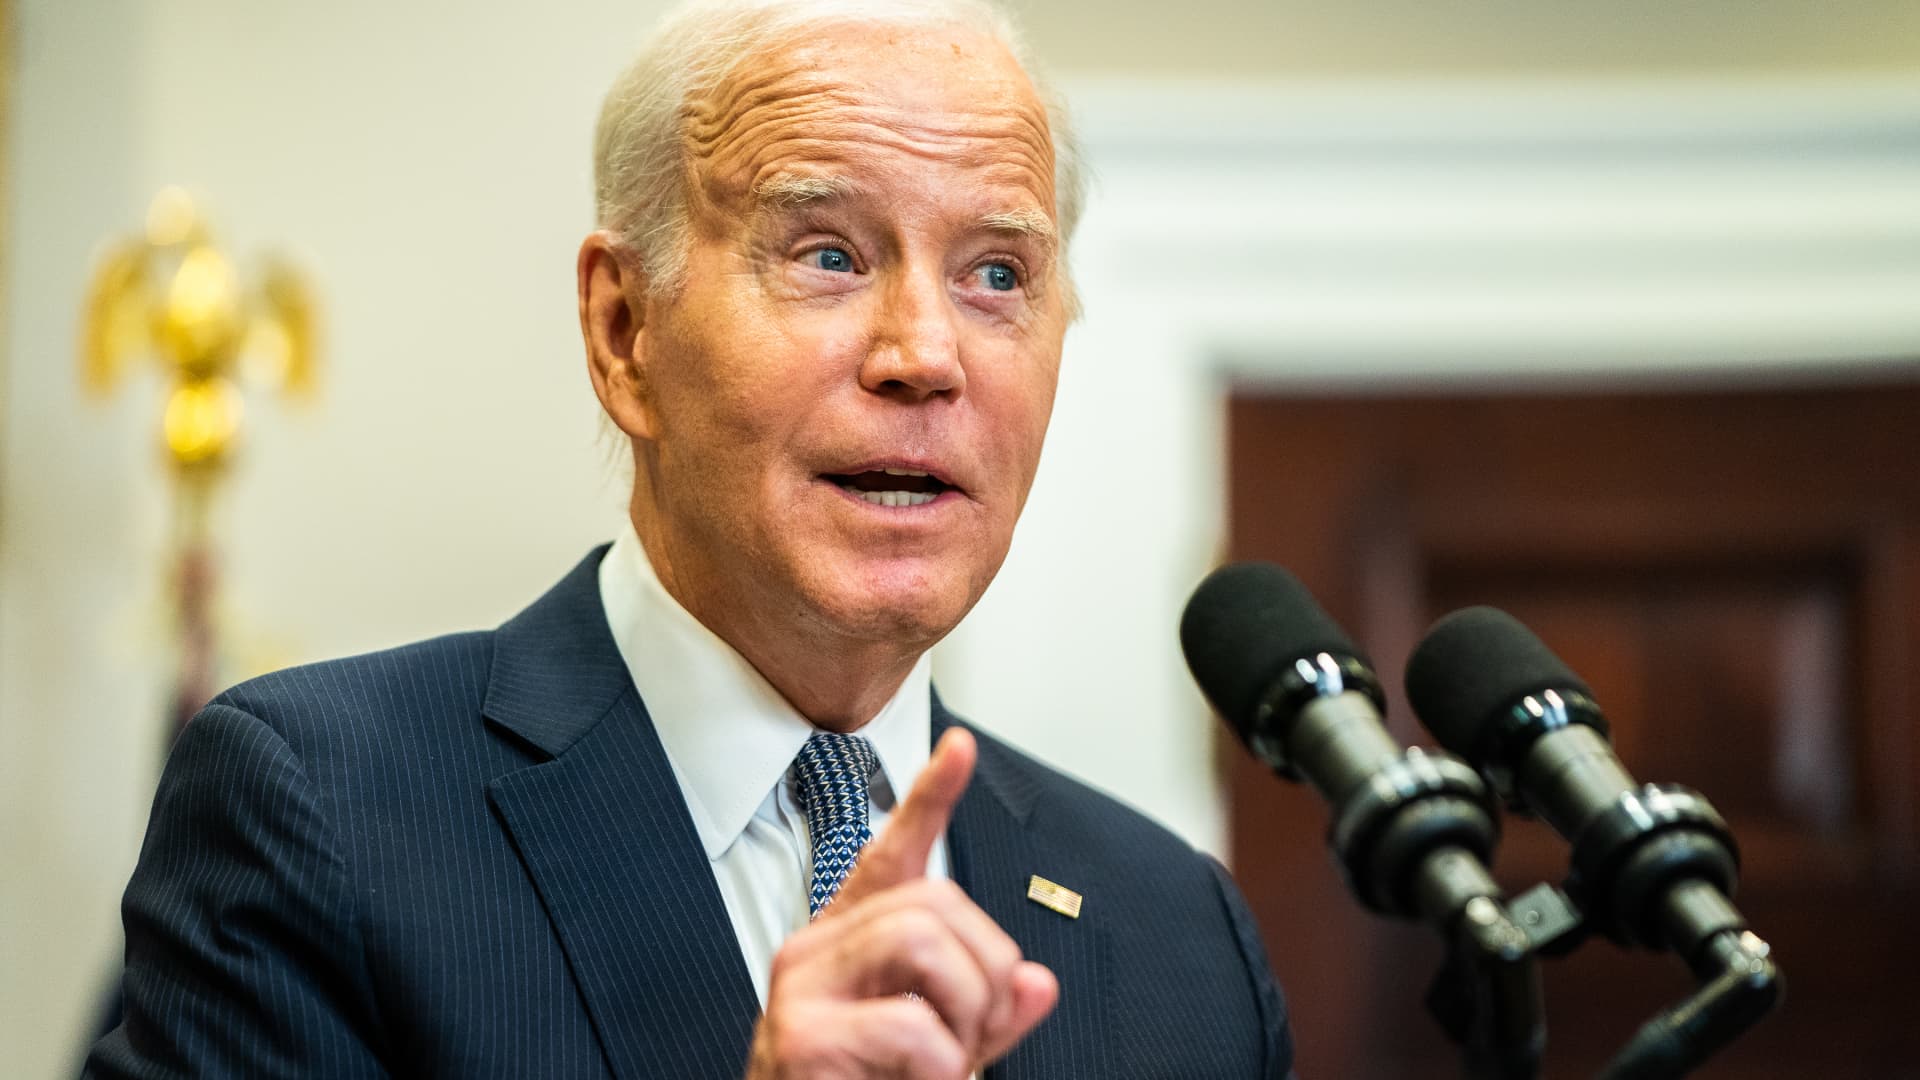 Biden is still trying to forgive student debt in 'a very direct confrontation' with Supreme Court, expert says